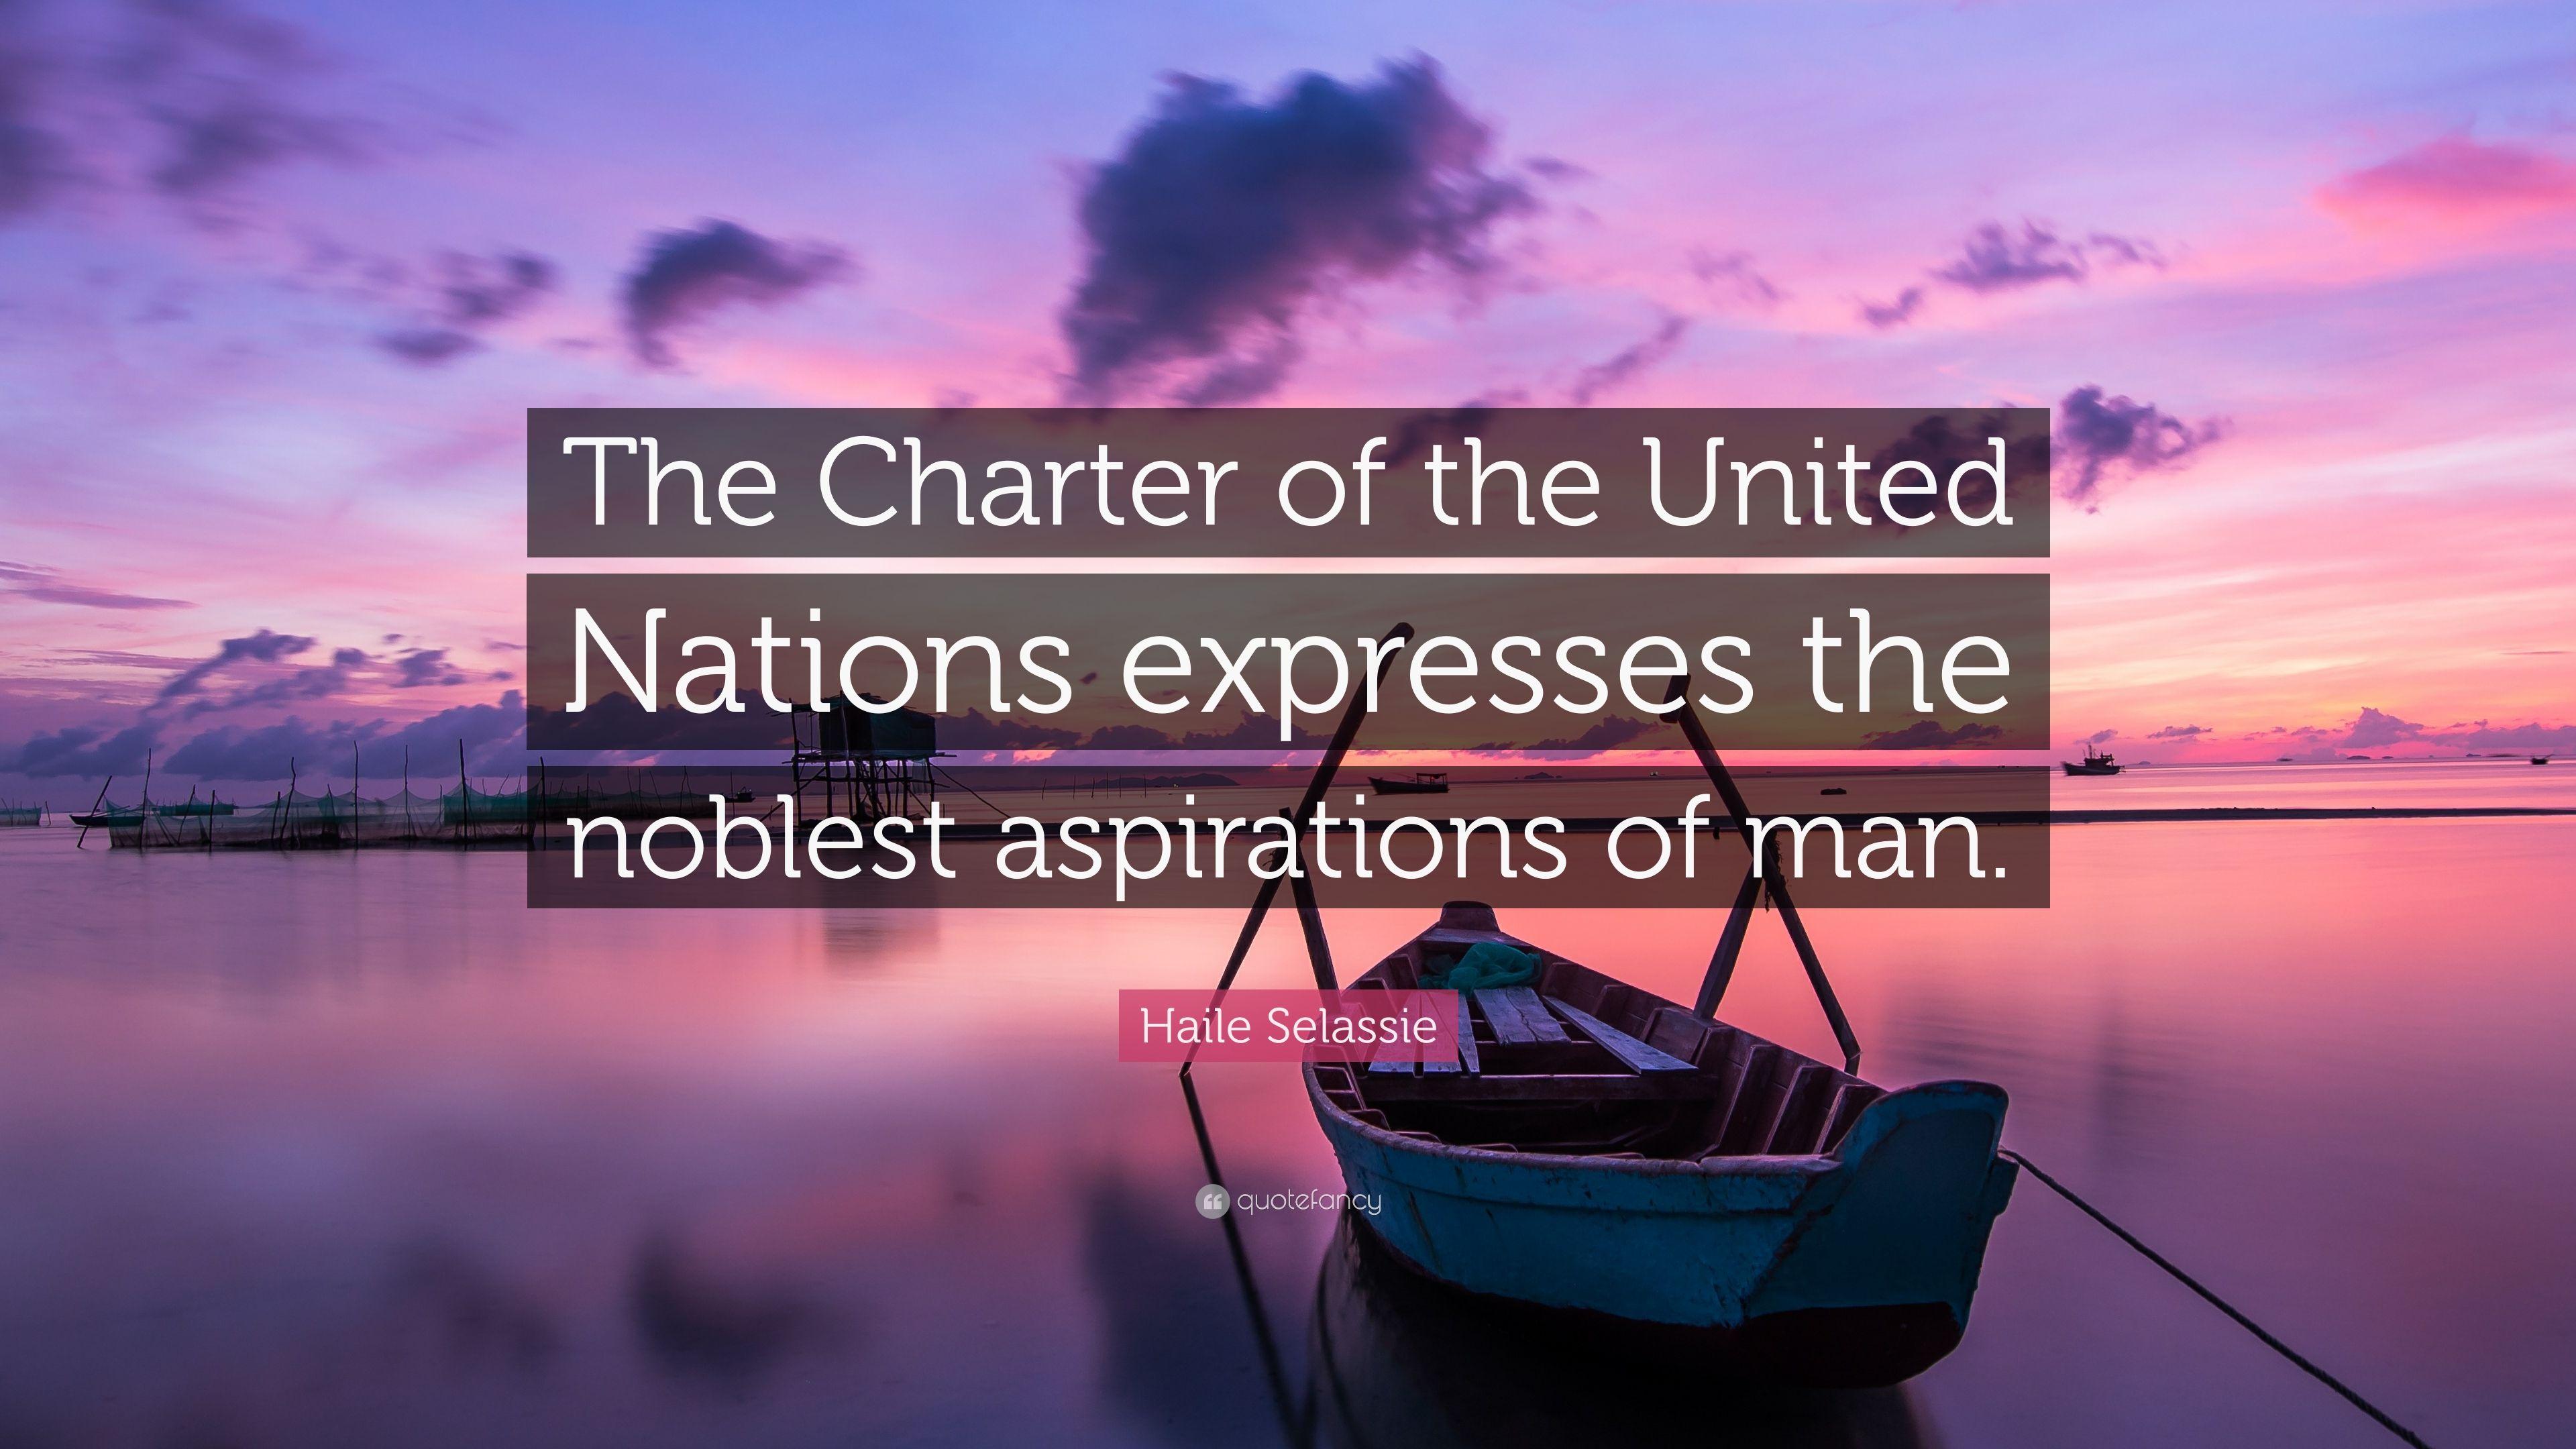 Haile Selassie Quote: “The Charter of the United Nations expresses